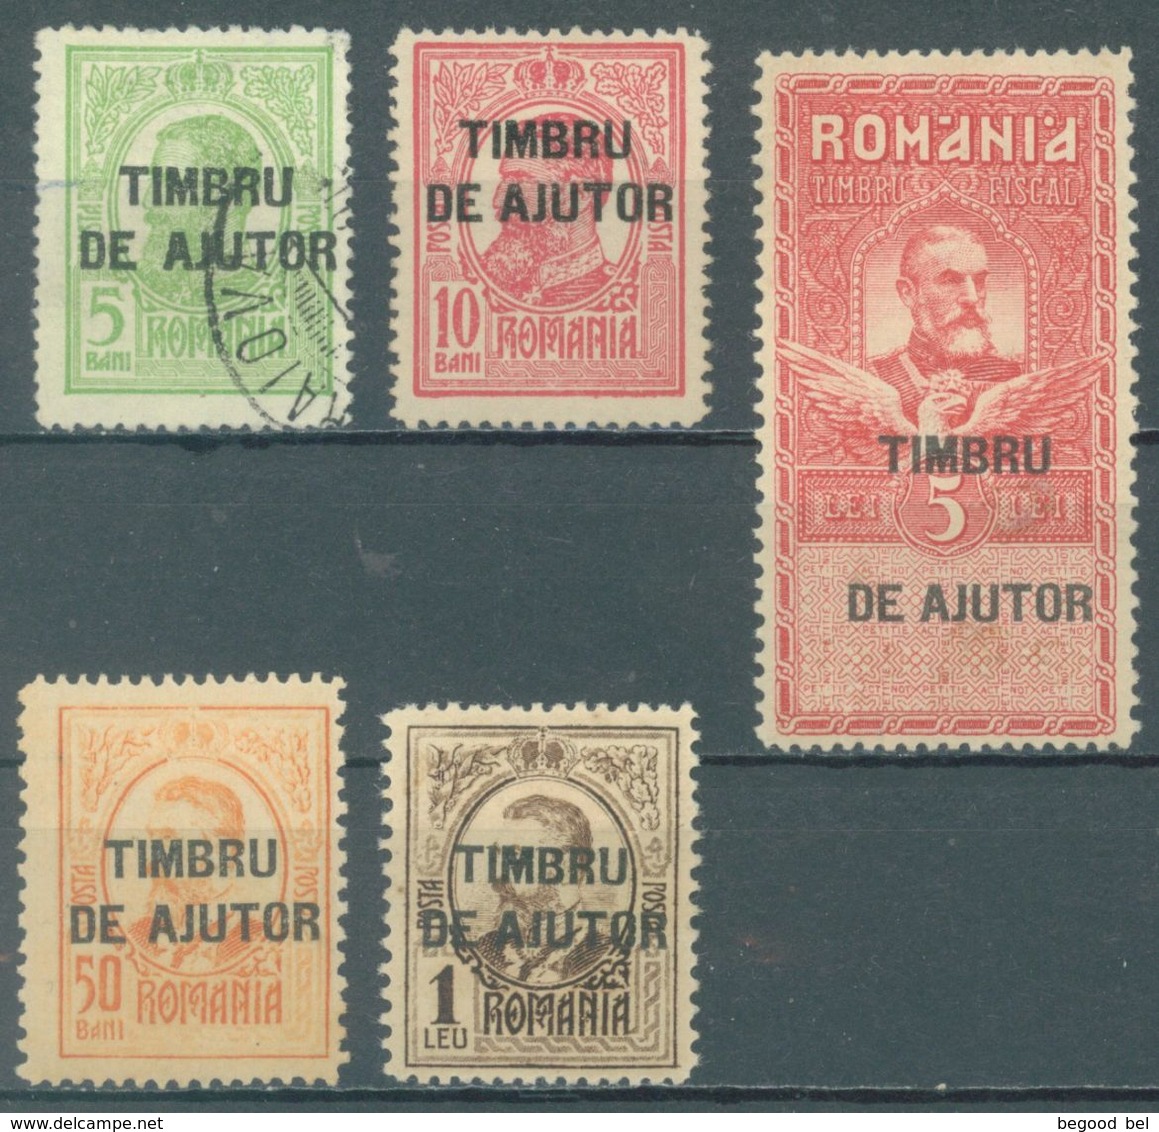 ROMANIA  - 1915-1916 - MH/*.AND USED/OBLIT - TIMBRU DE AJUTOR OVERPRINT -Yv 232-235A  - Lot 16523 - 5 L PERF 11 1/2 - Neufs